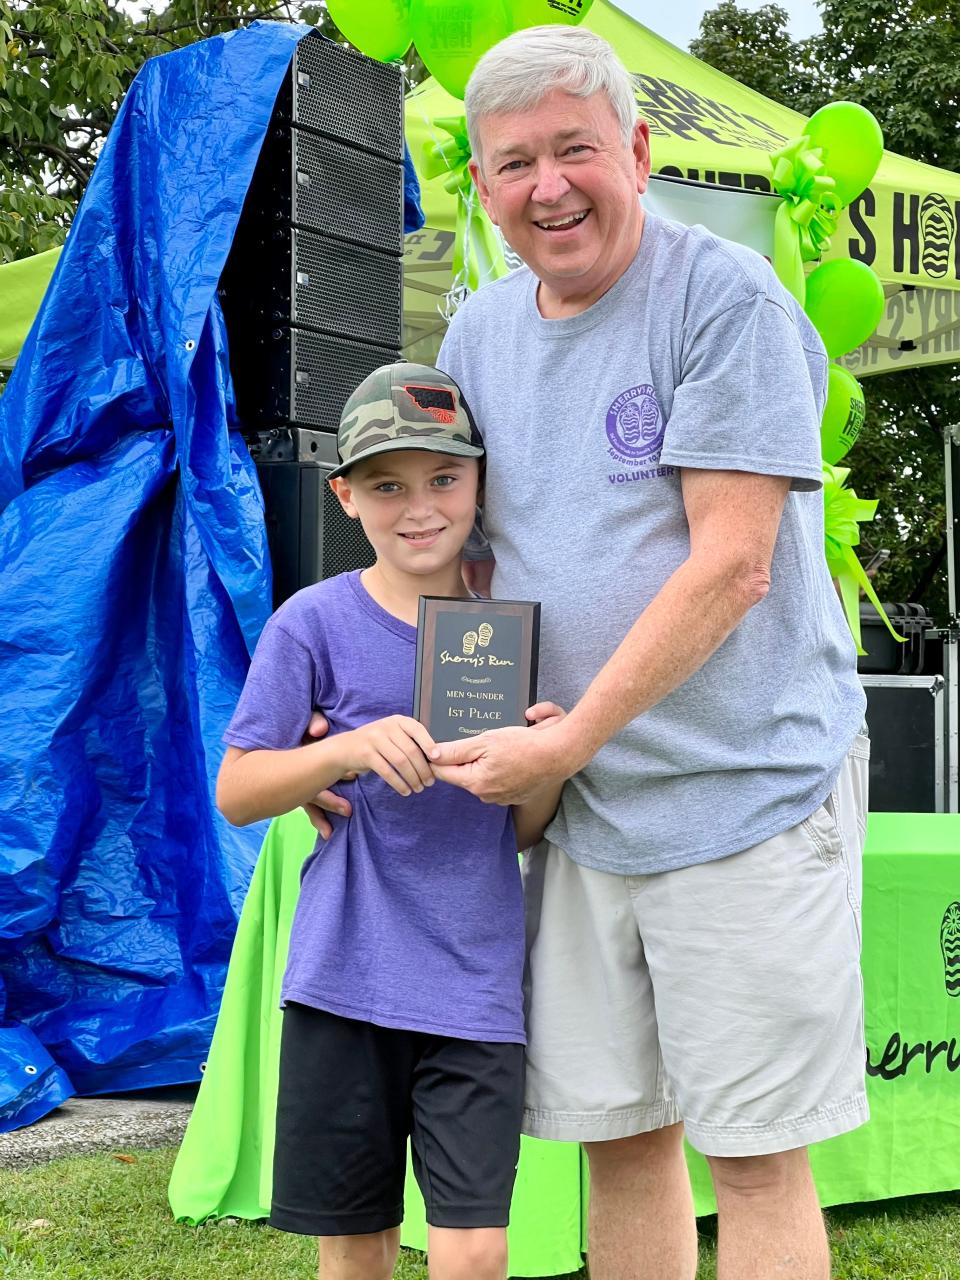 Gary Whitaker, right, with his grandson Carter Whitaker, left. Carter won the 9-under division in 2022 of the Sherry's 5K Run/Walk in Lebanon.